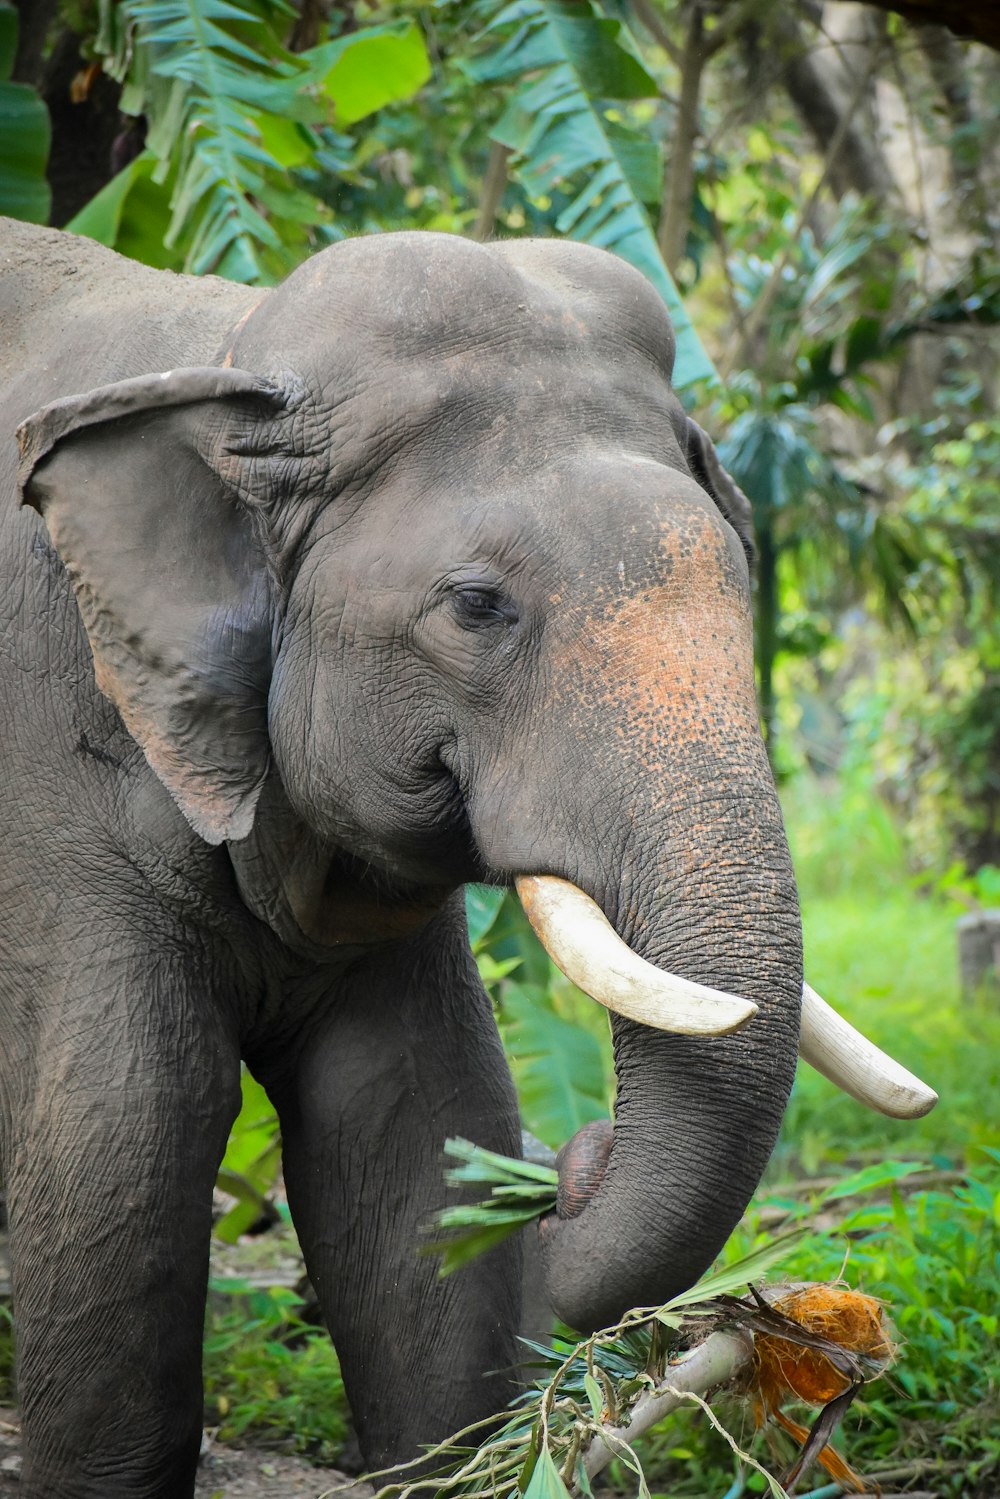 an elephant with tusks standing in a forest